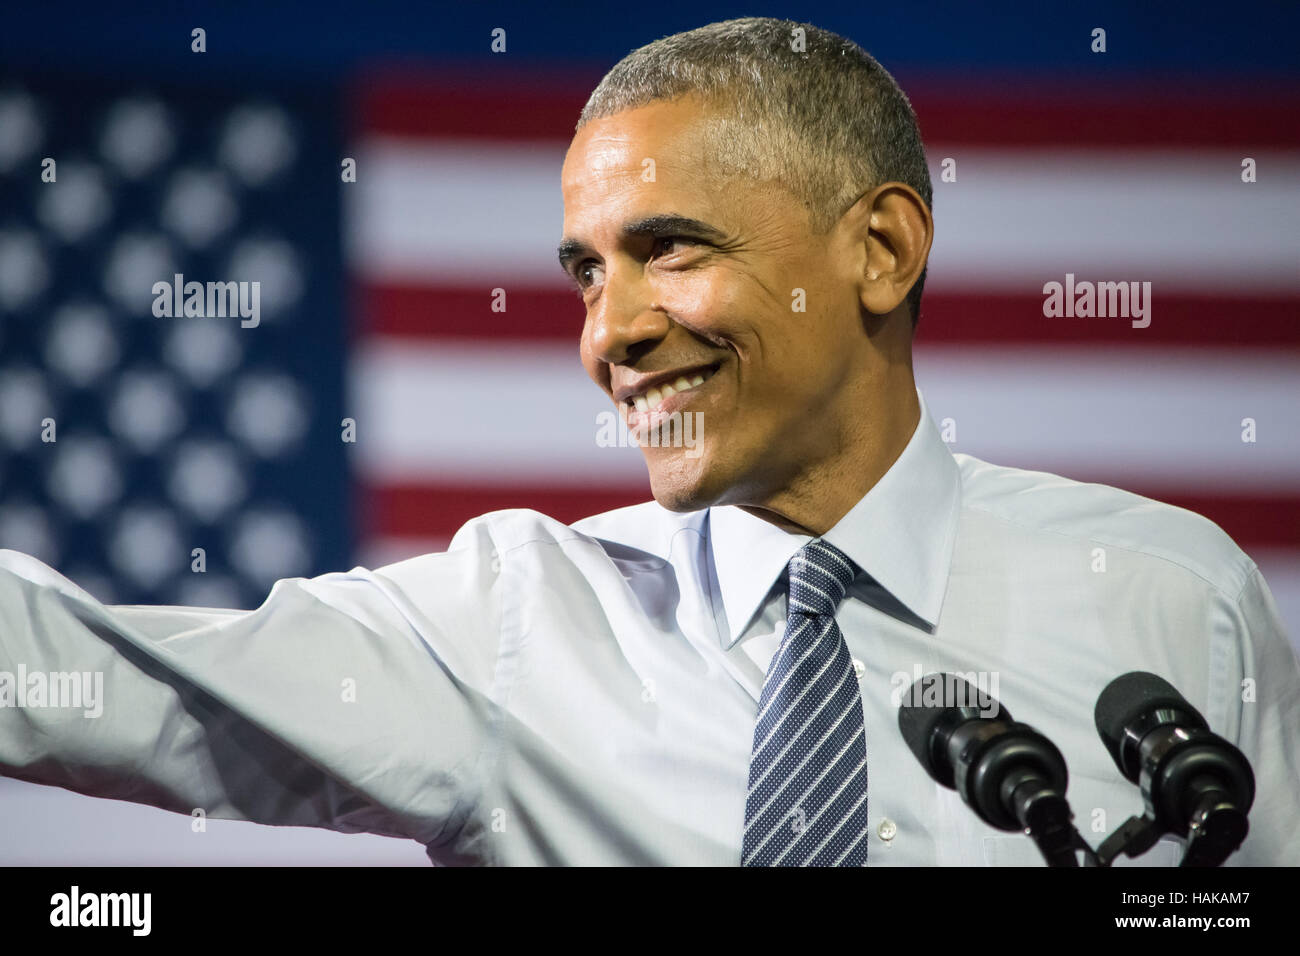 Barack Obama, President of the United States. Smiling with his right arm extended toward the crowd. Stock Photo